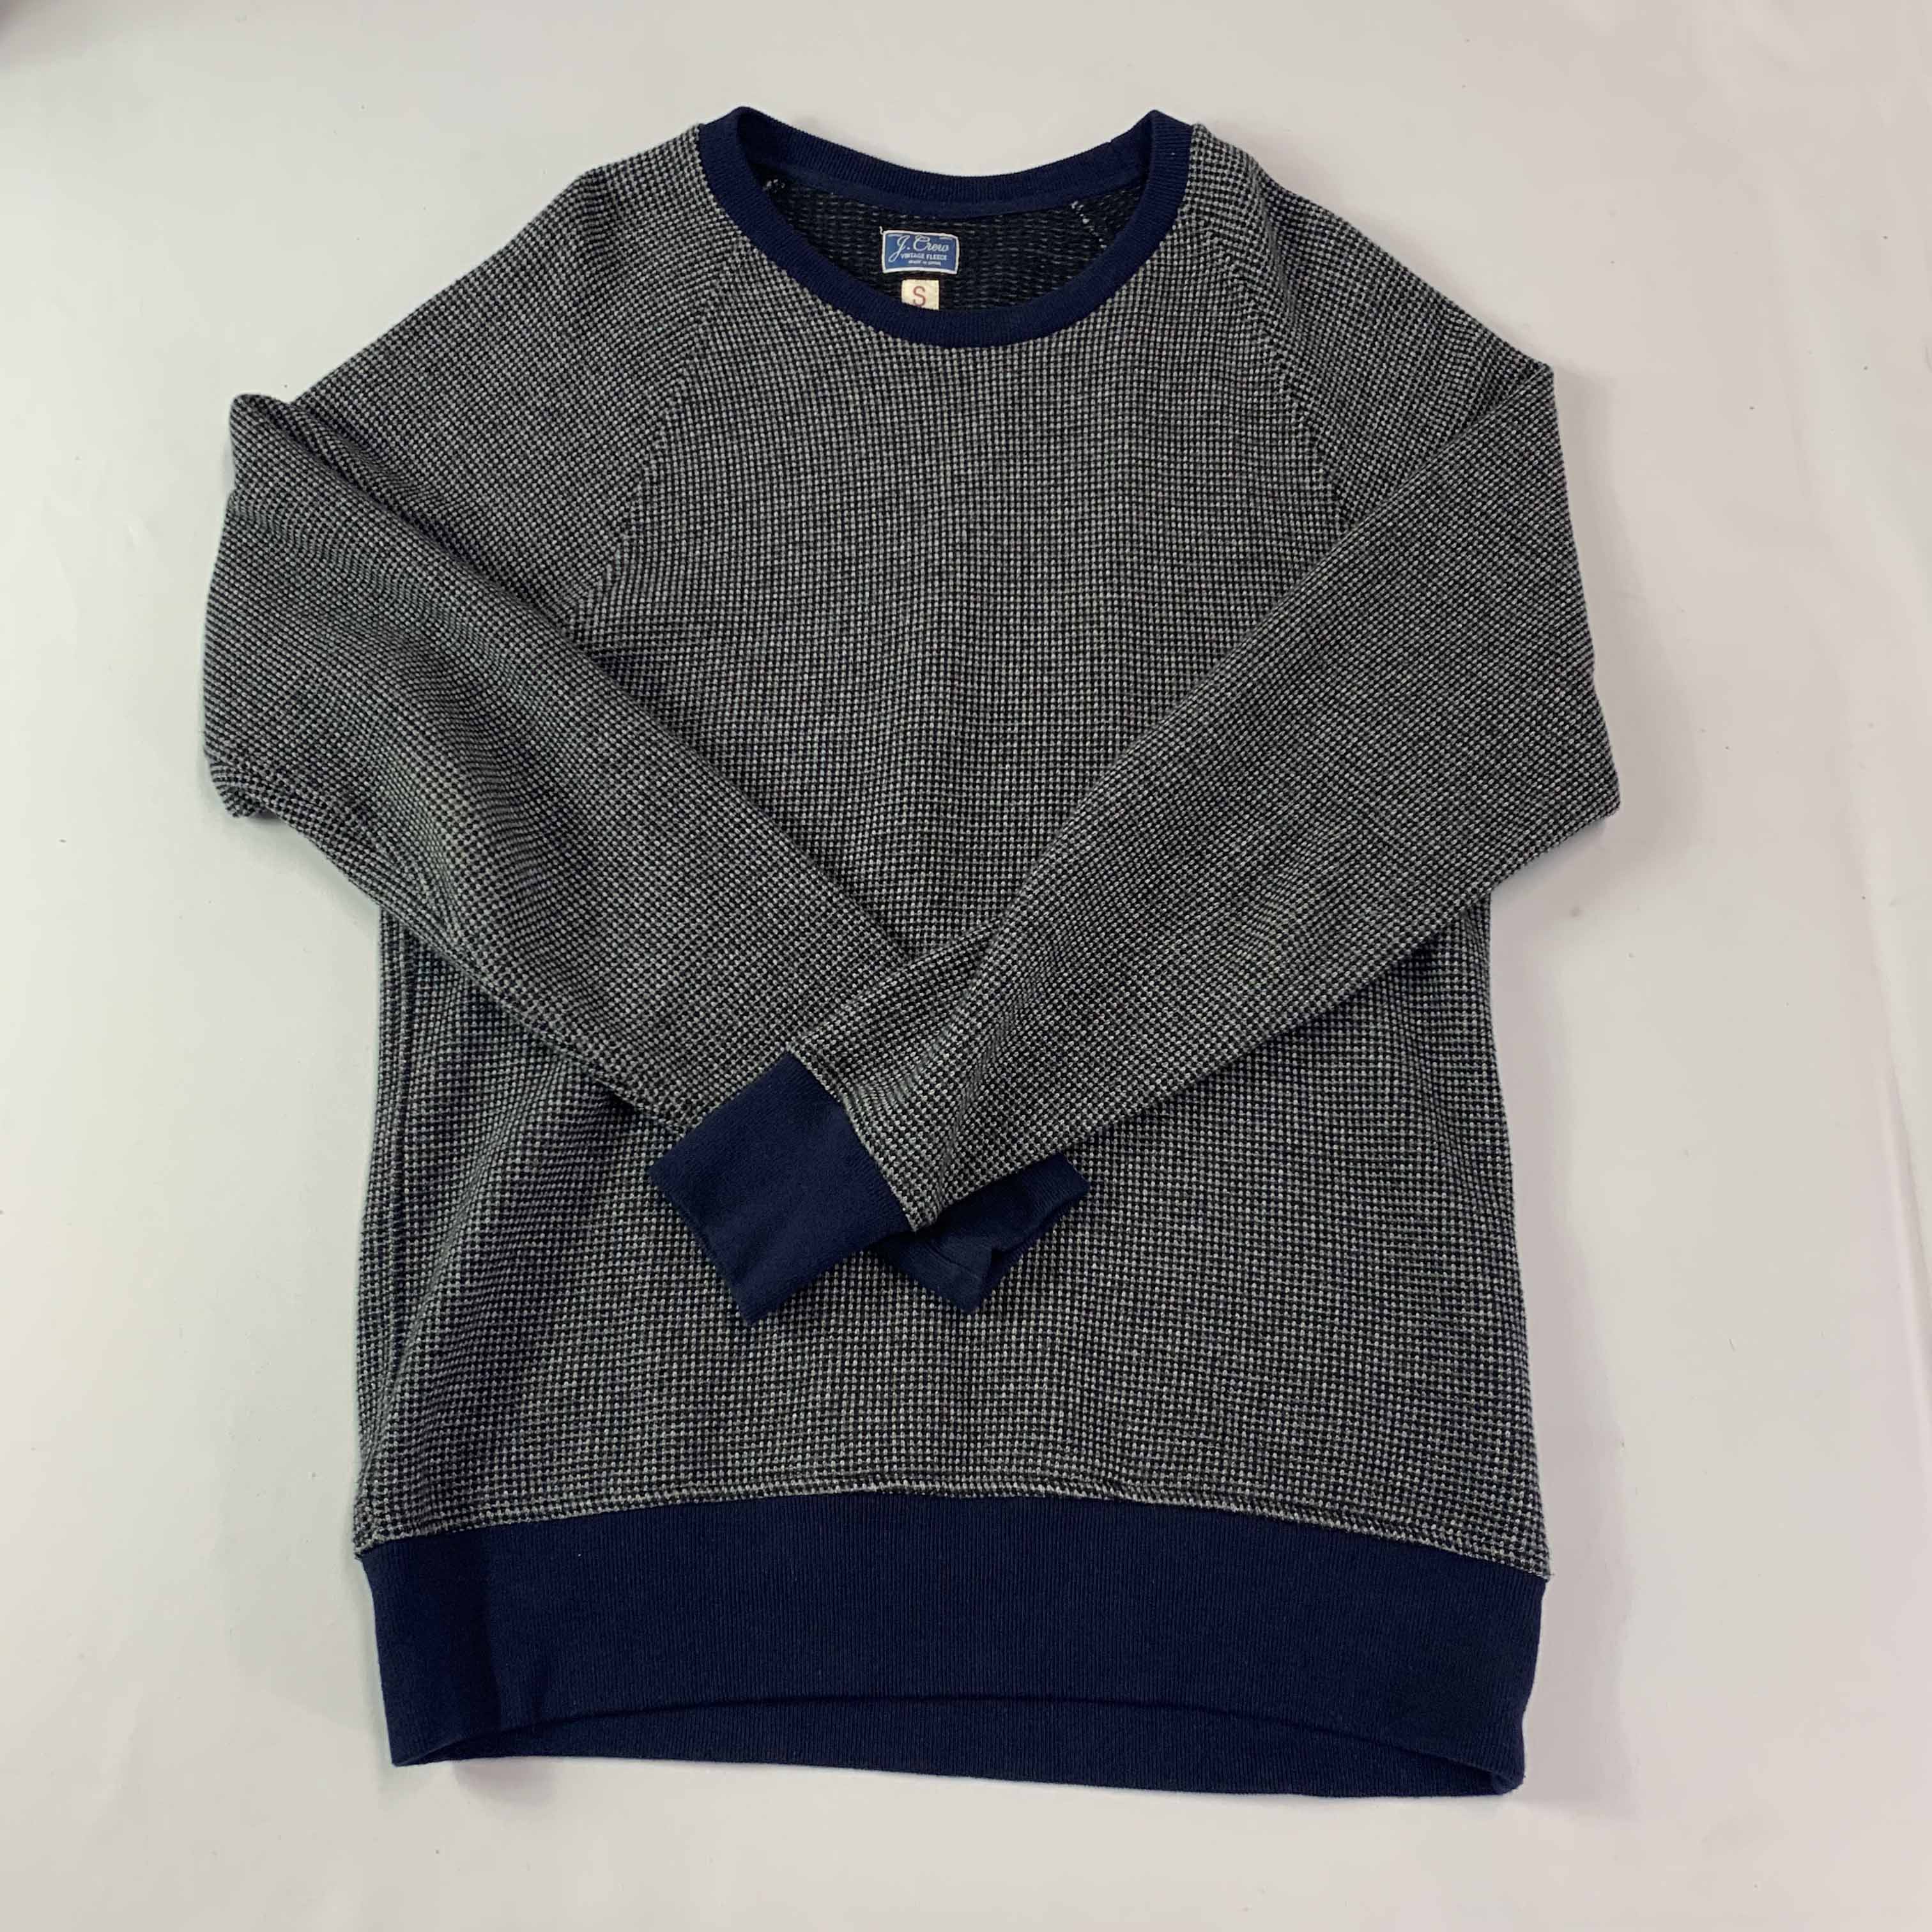 [J.Crew] Navy Patterned Sweater - Size S